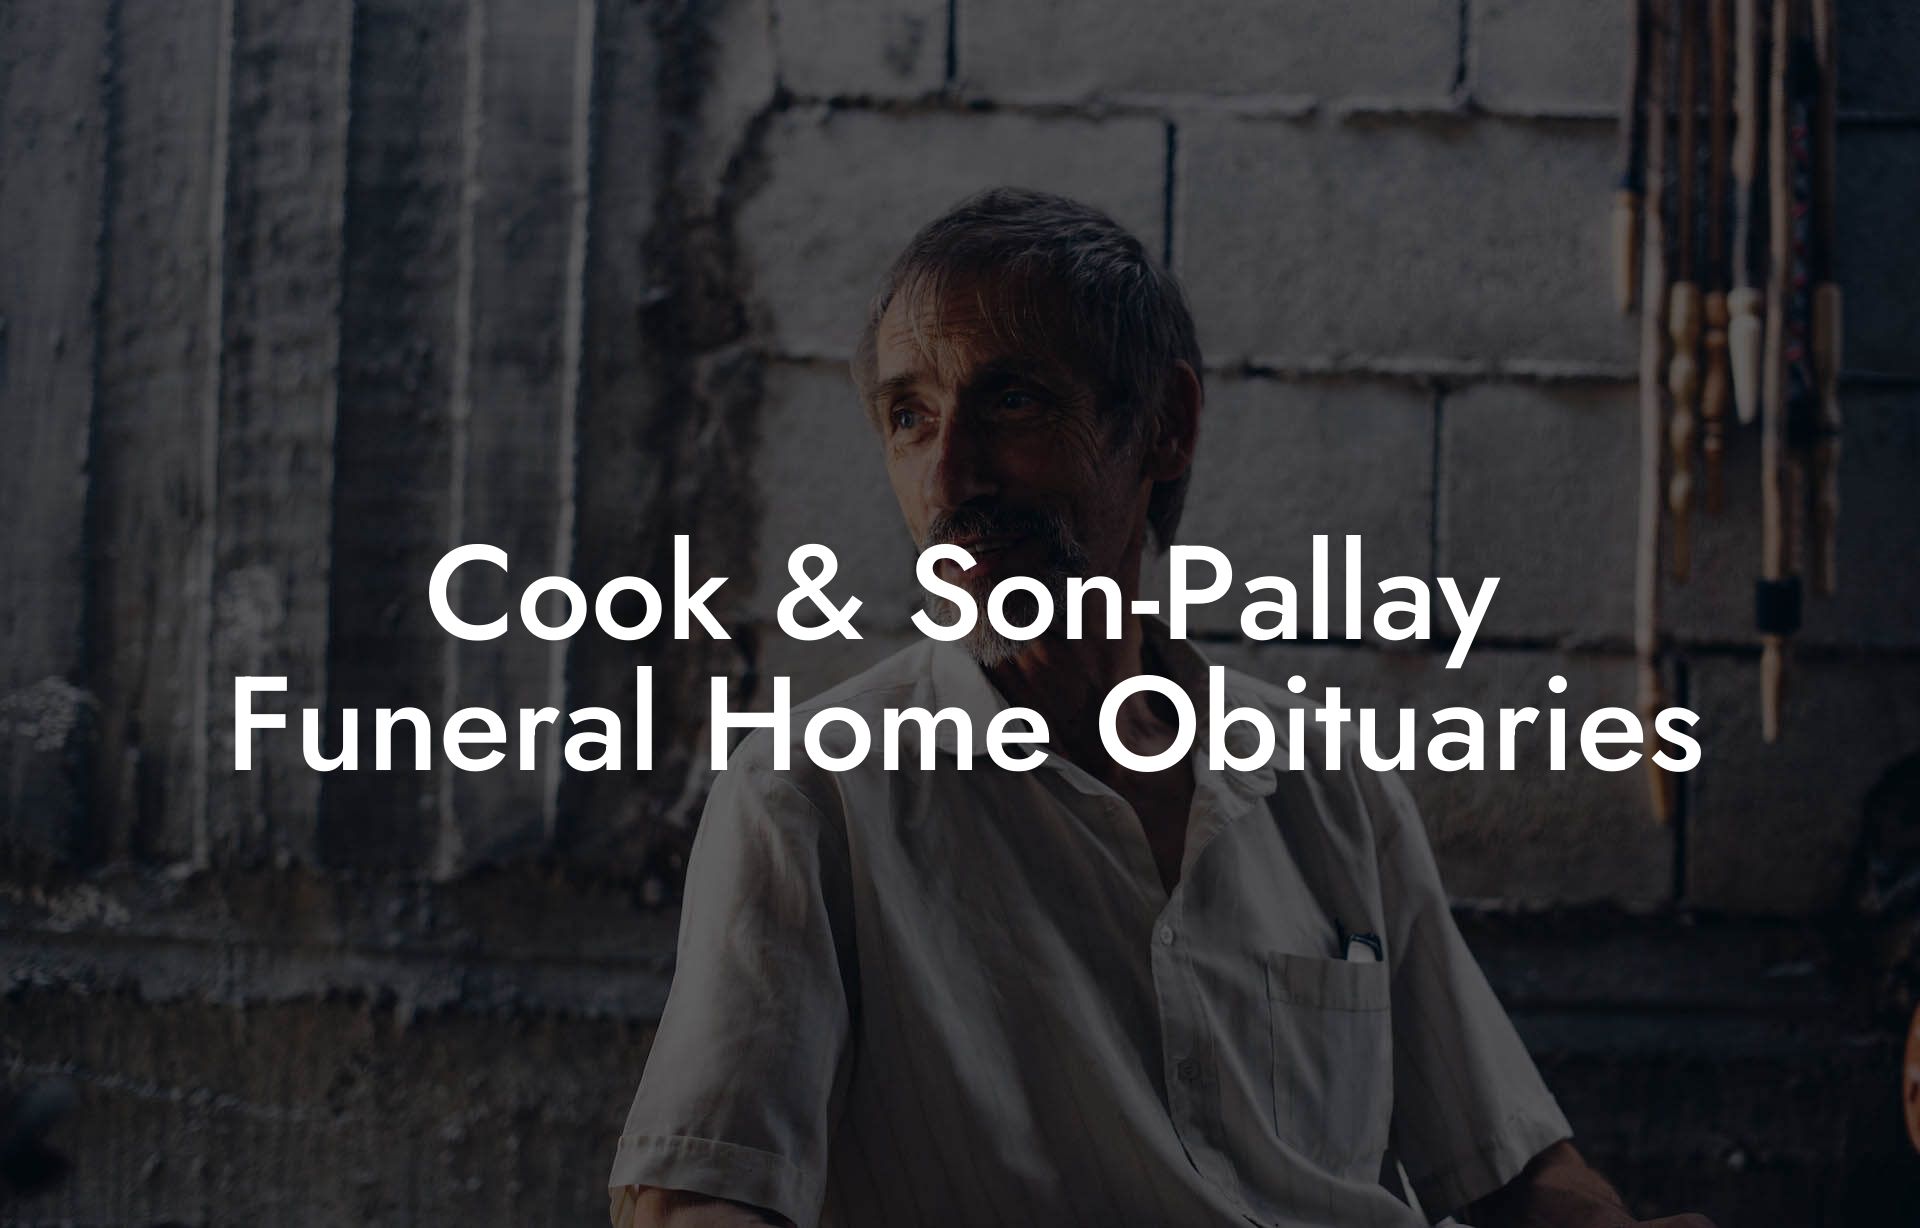 Cook & Son-Pallay Funeral Home Obituaries